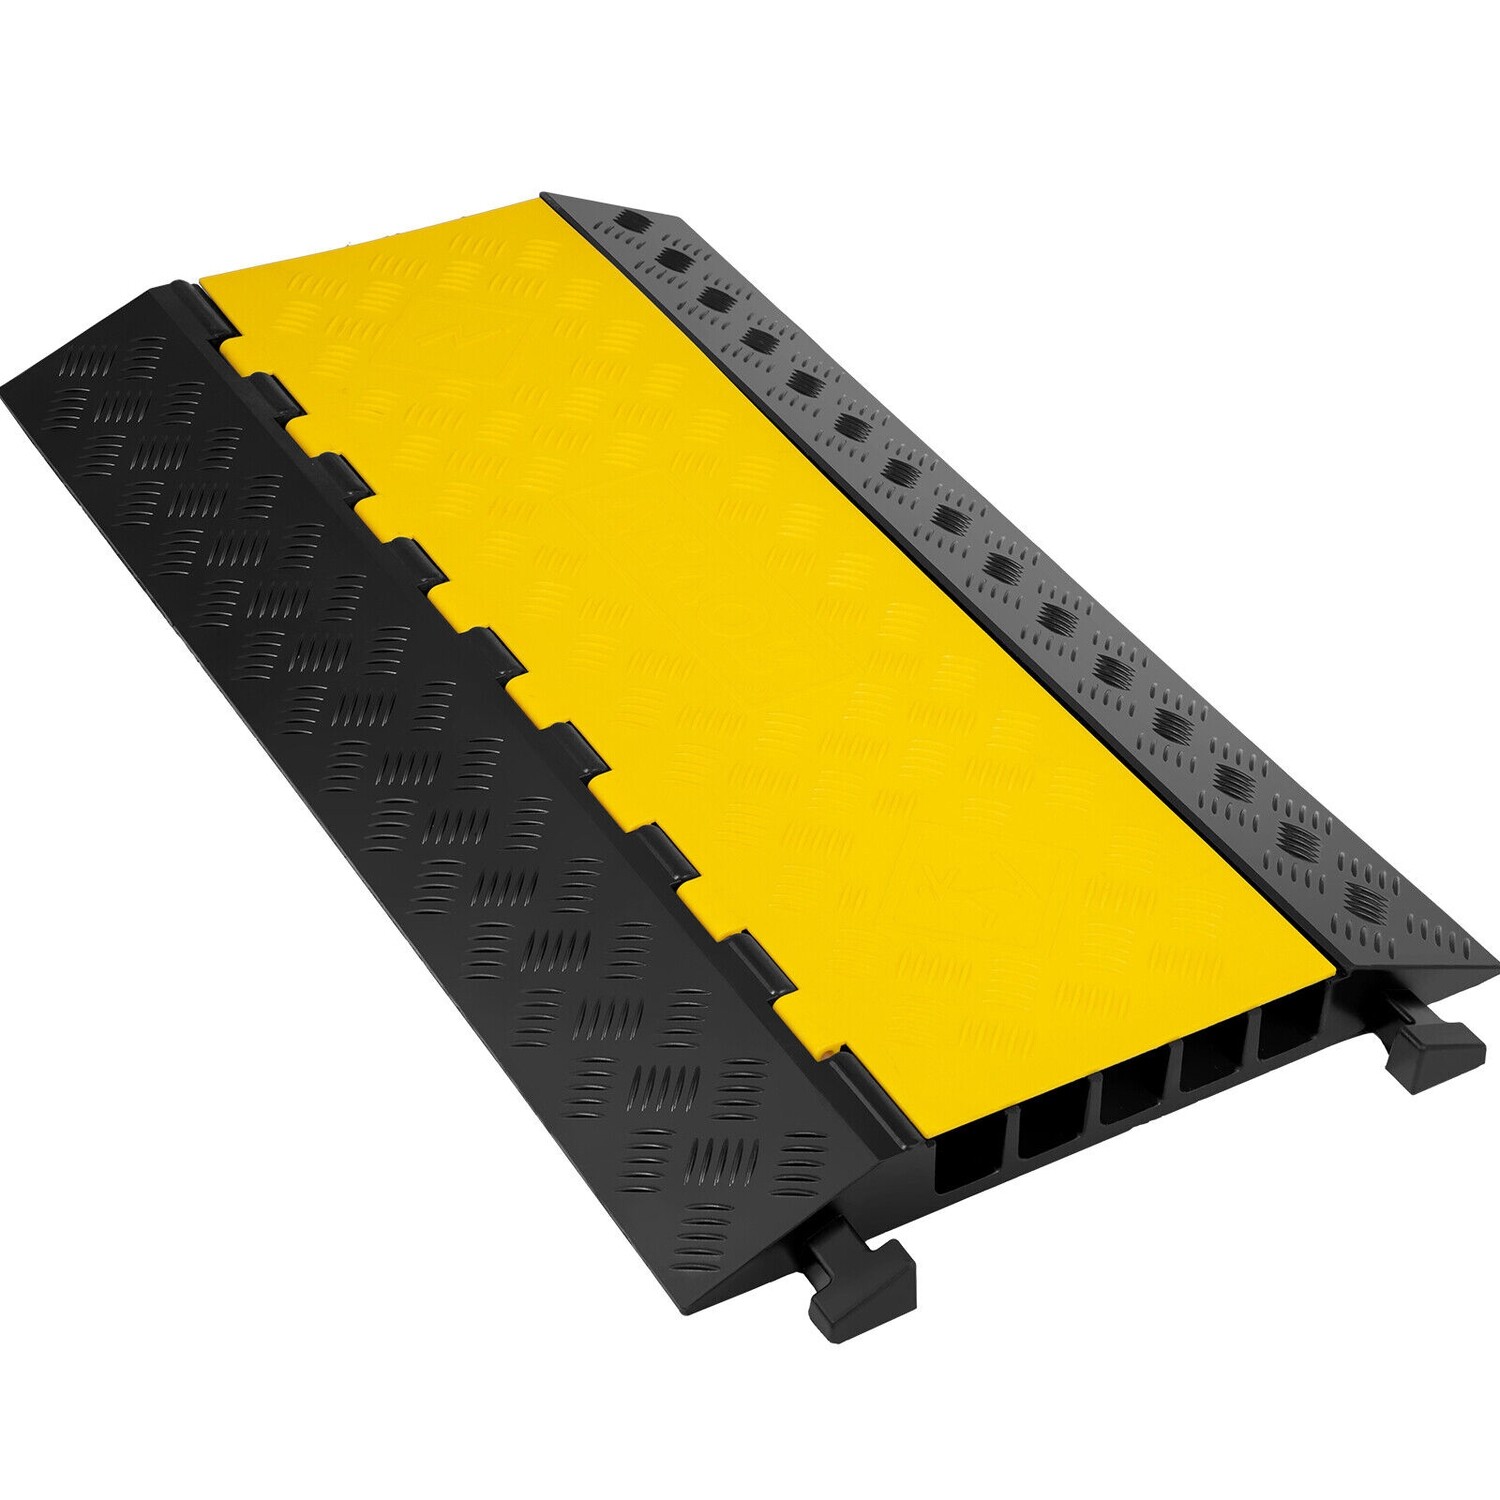 Extreme Cable Ramps 5 Channel Rubber Cable Protectors 66000lbs